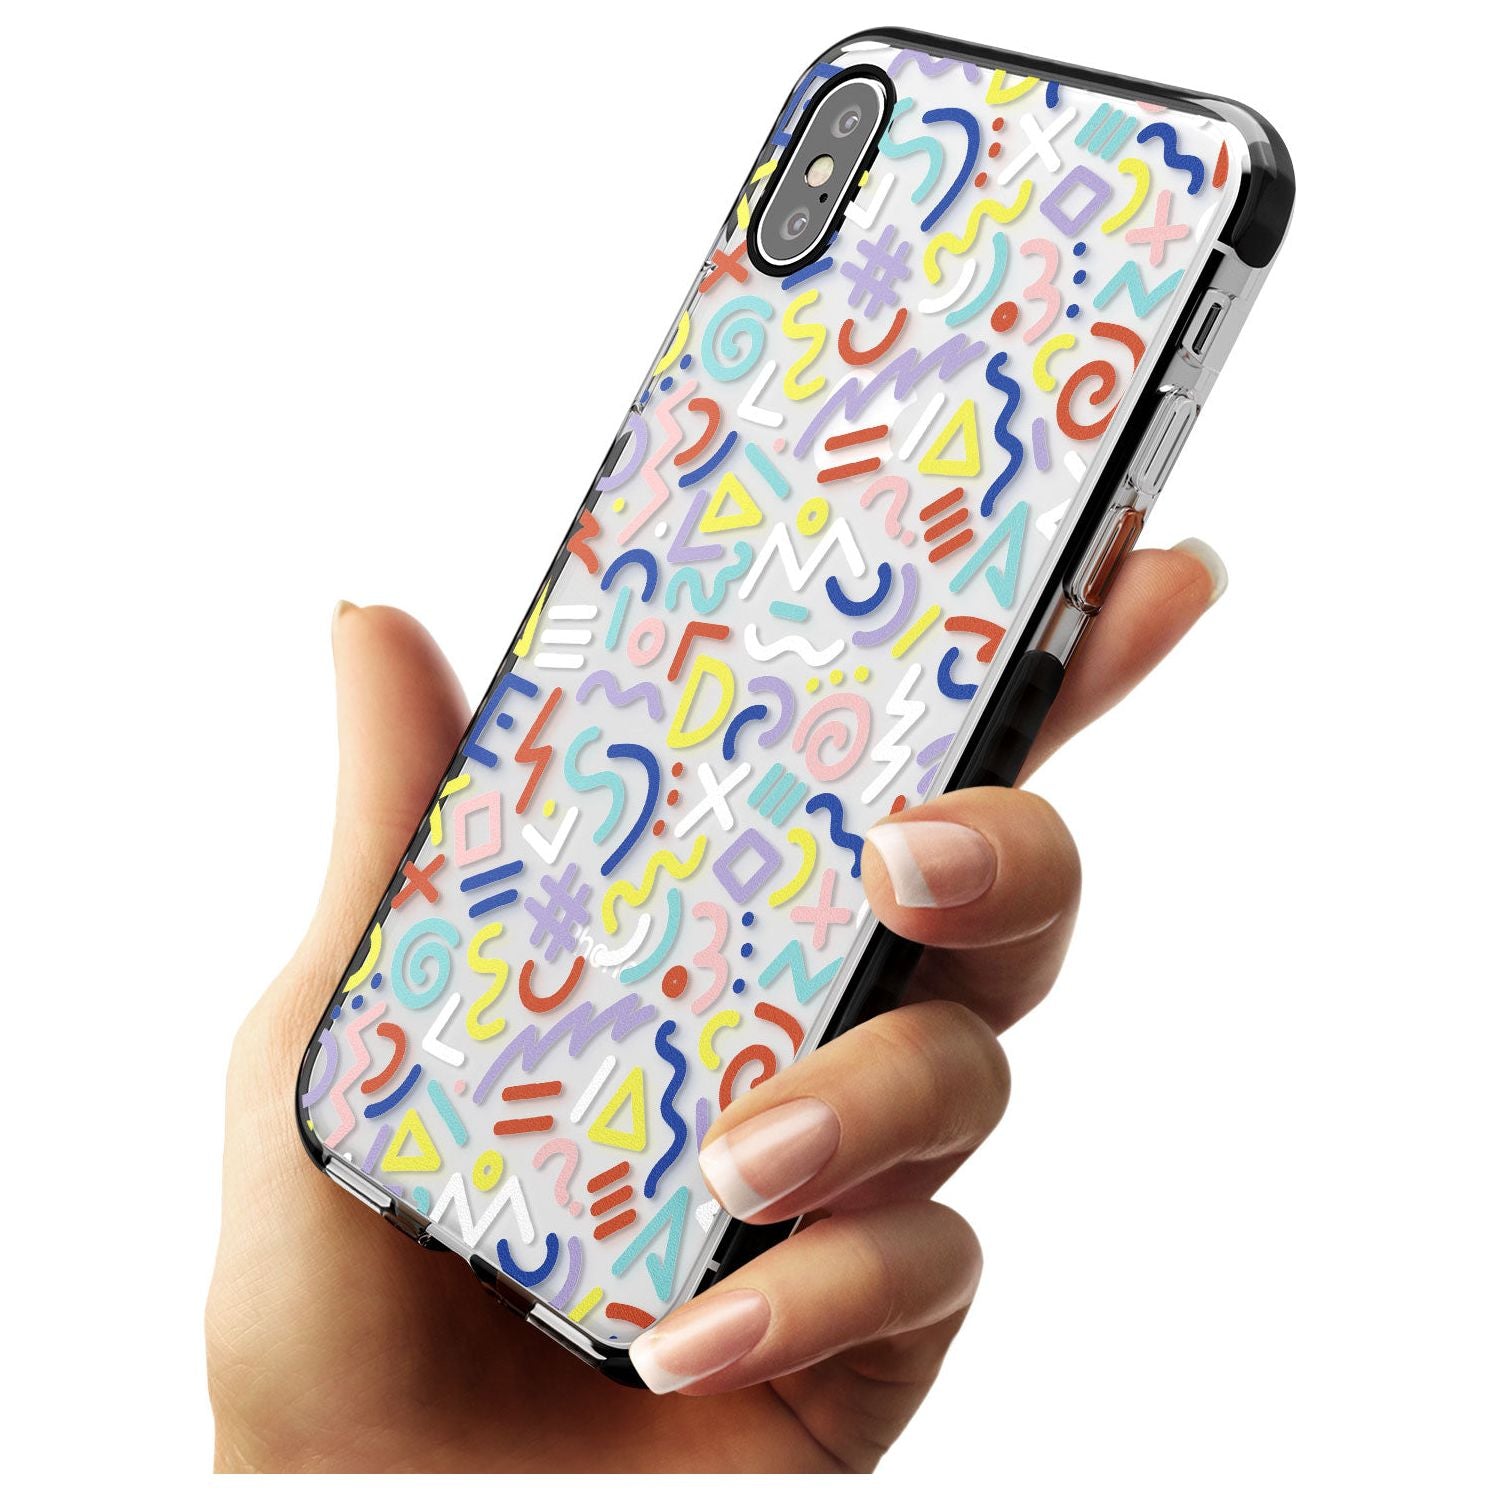 Colourful Mixed Shapes Retro Pattern Design Black Impact Phone Case for iPhone X XS Max XR